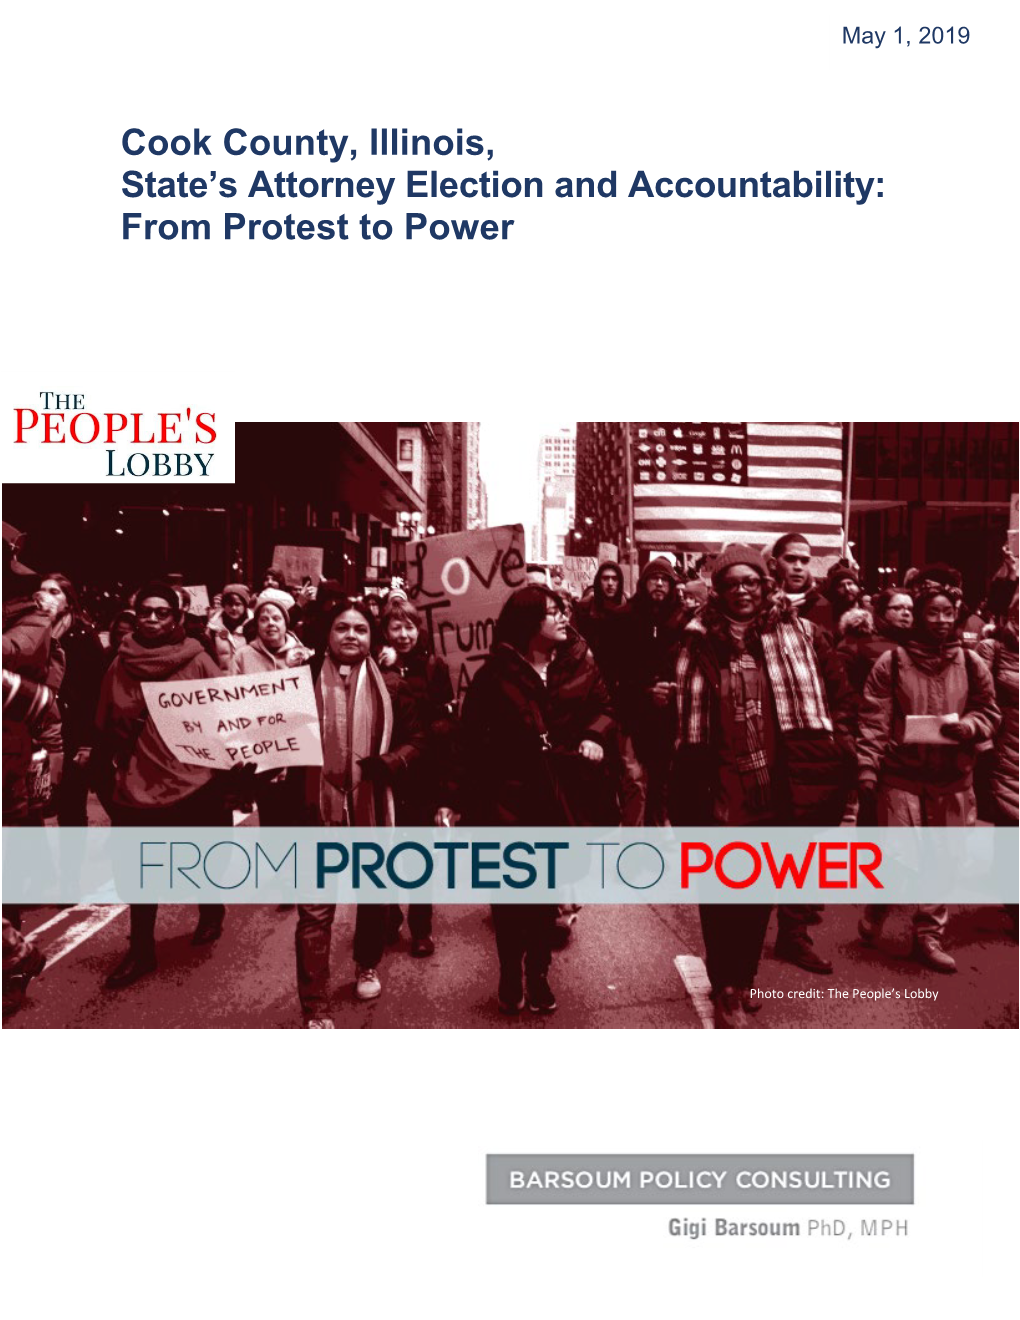 Cook County, Illinois, State's Attorney Election and Accountability